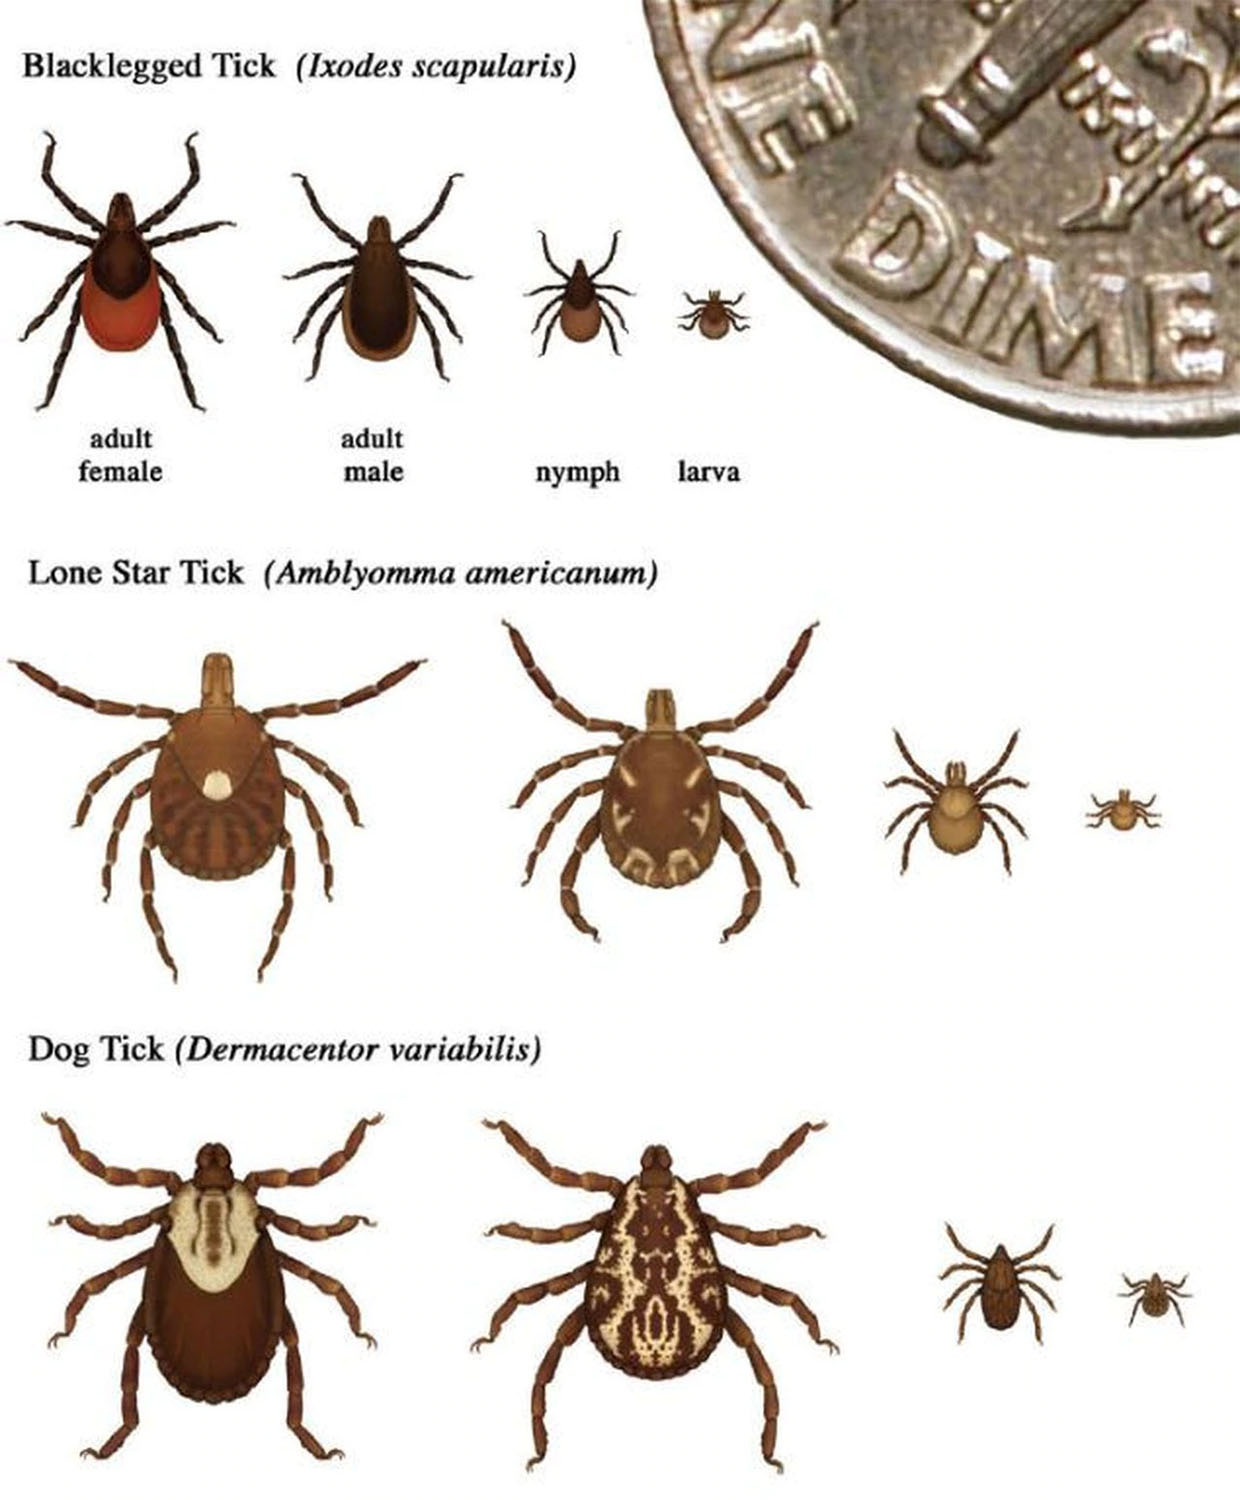 dog tick, deer tick and lone star tick in various stages of developmtn